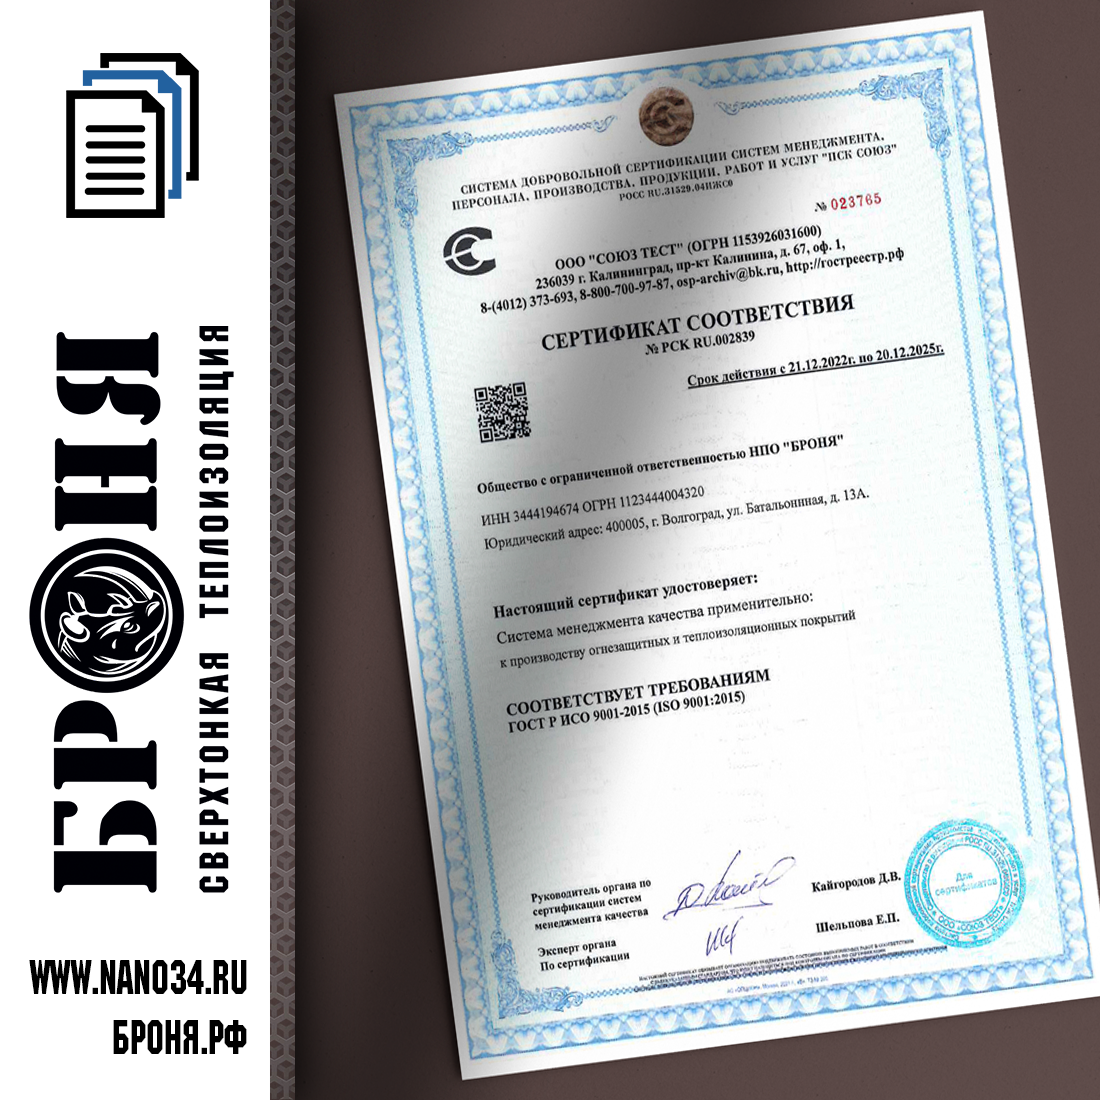 "BRONYA" has received an updated Certificate of compliance with International Quality Standards ISO 9001.